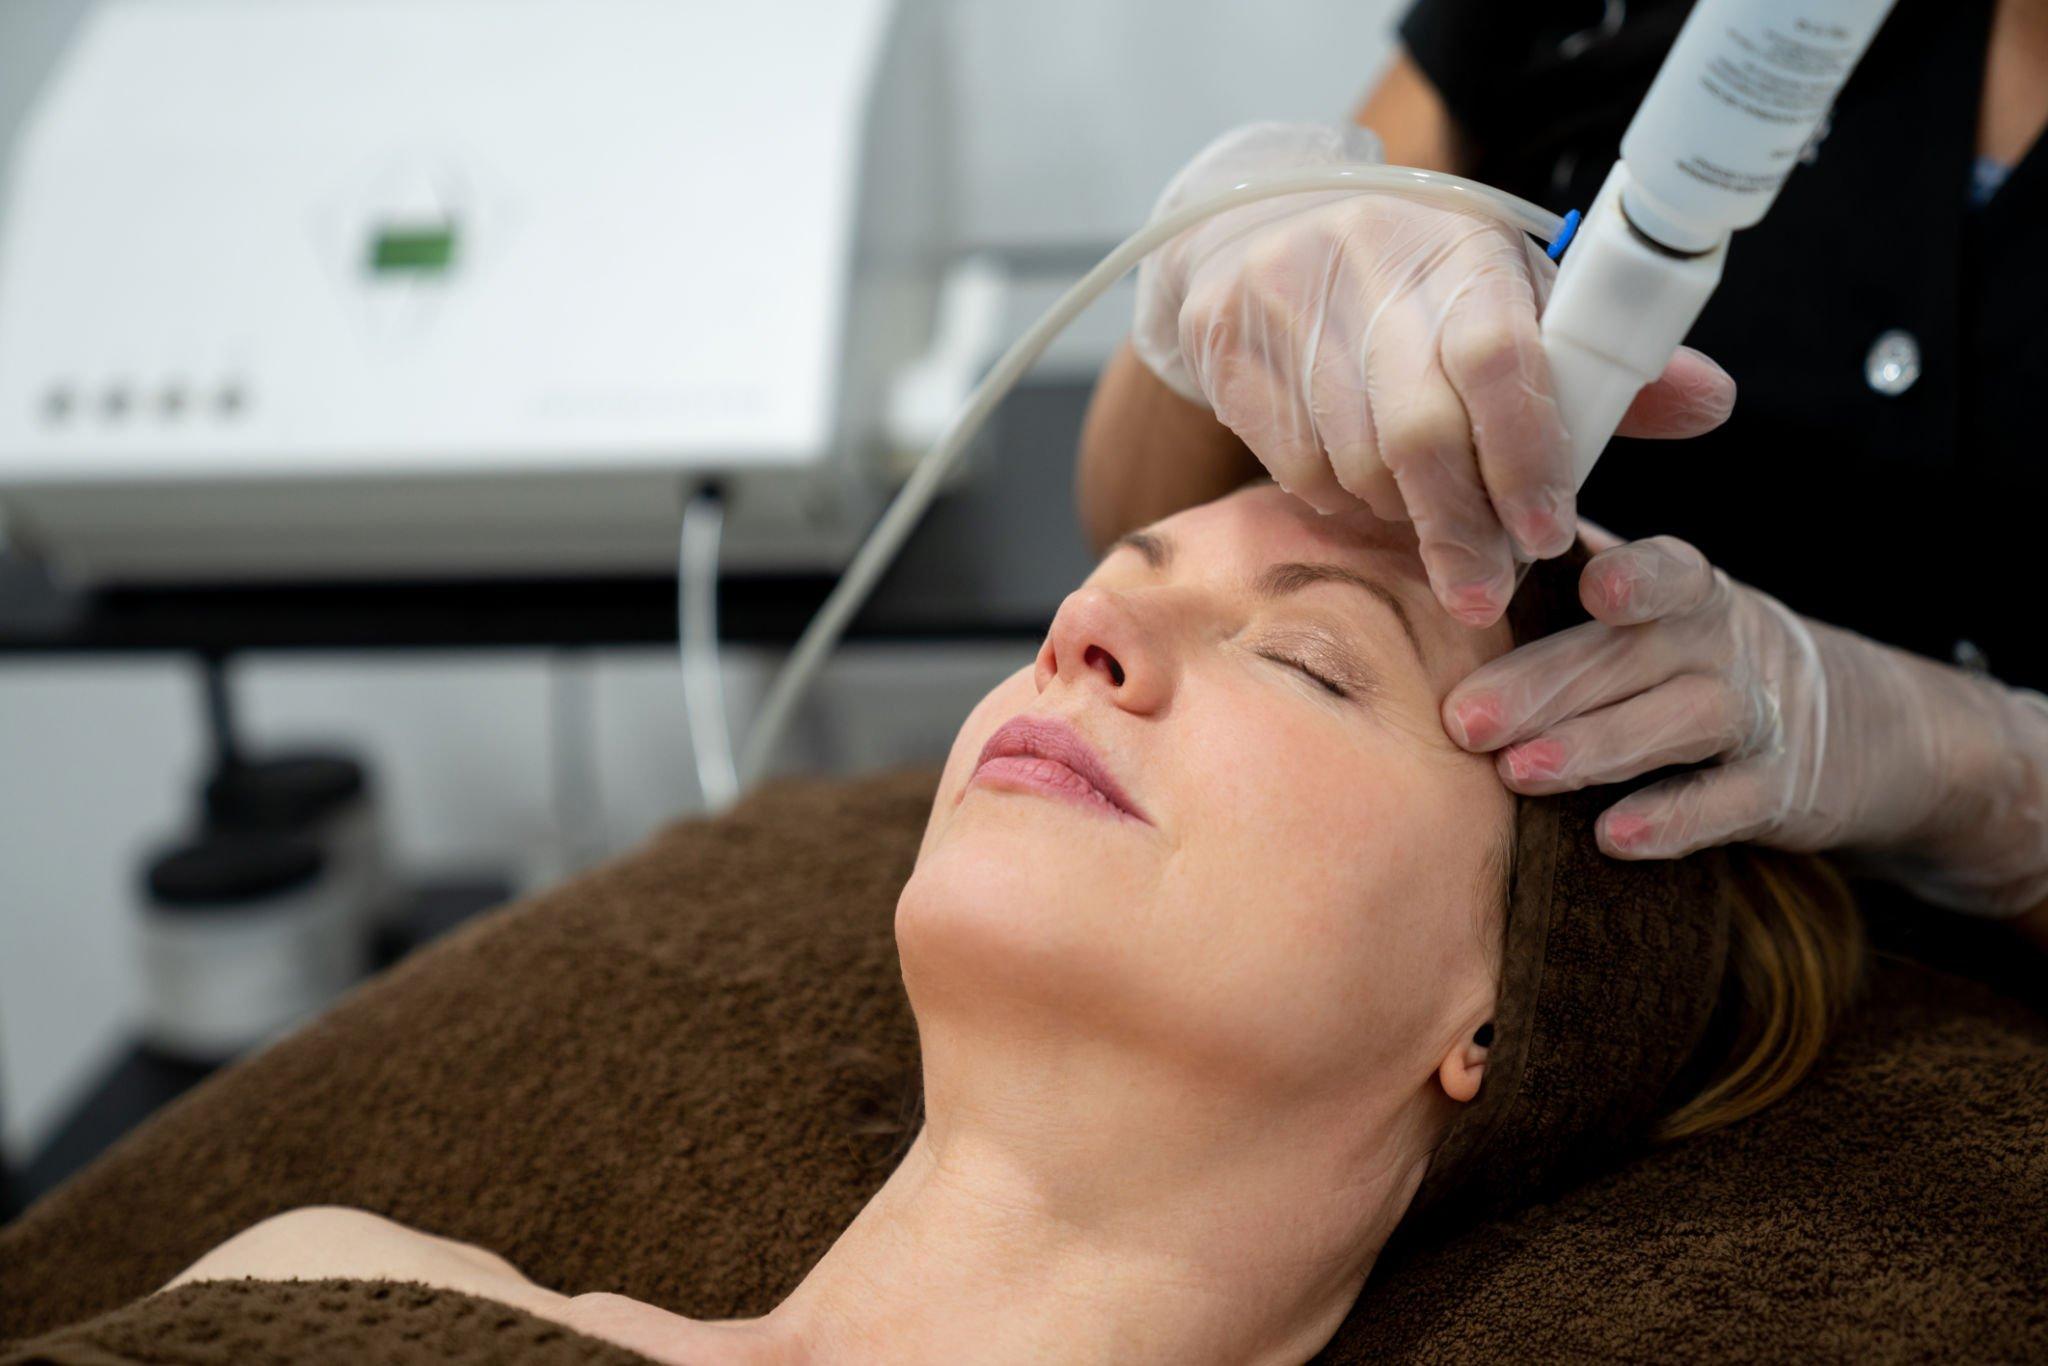 What is skin polishing or microdermabrasion?